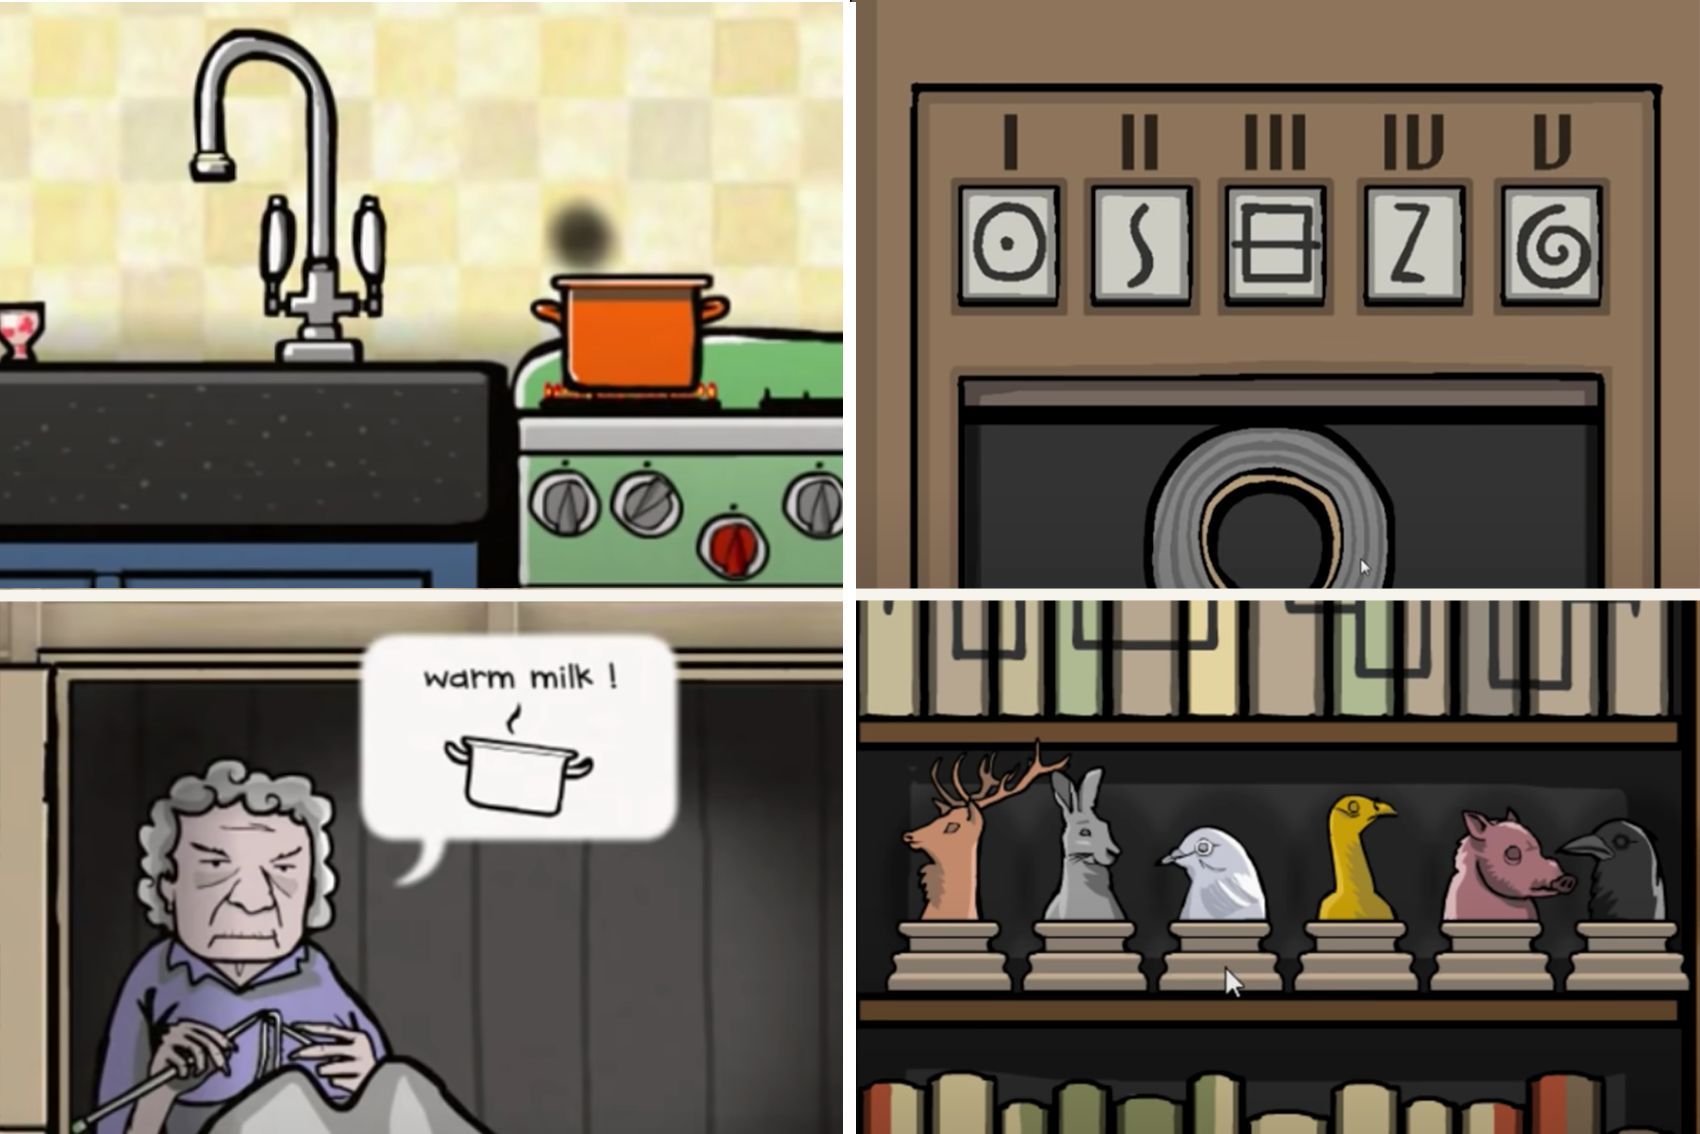 The past within rusty. Rusty Lake игра. Расти Лейк the past within. The past within Rusty Lake. Rusty Lake the past within куб.